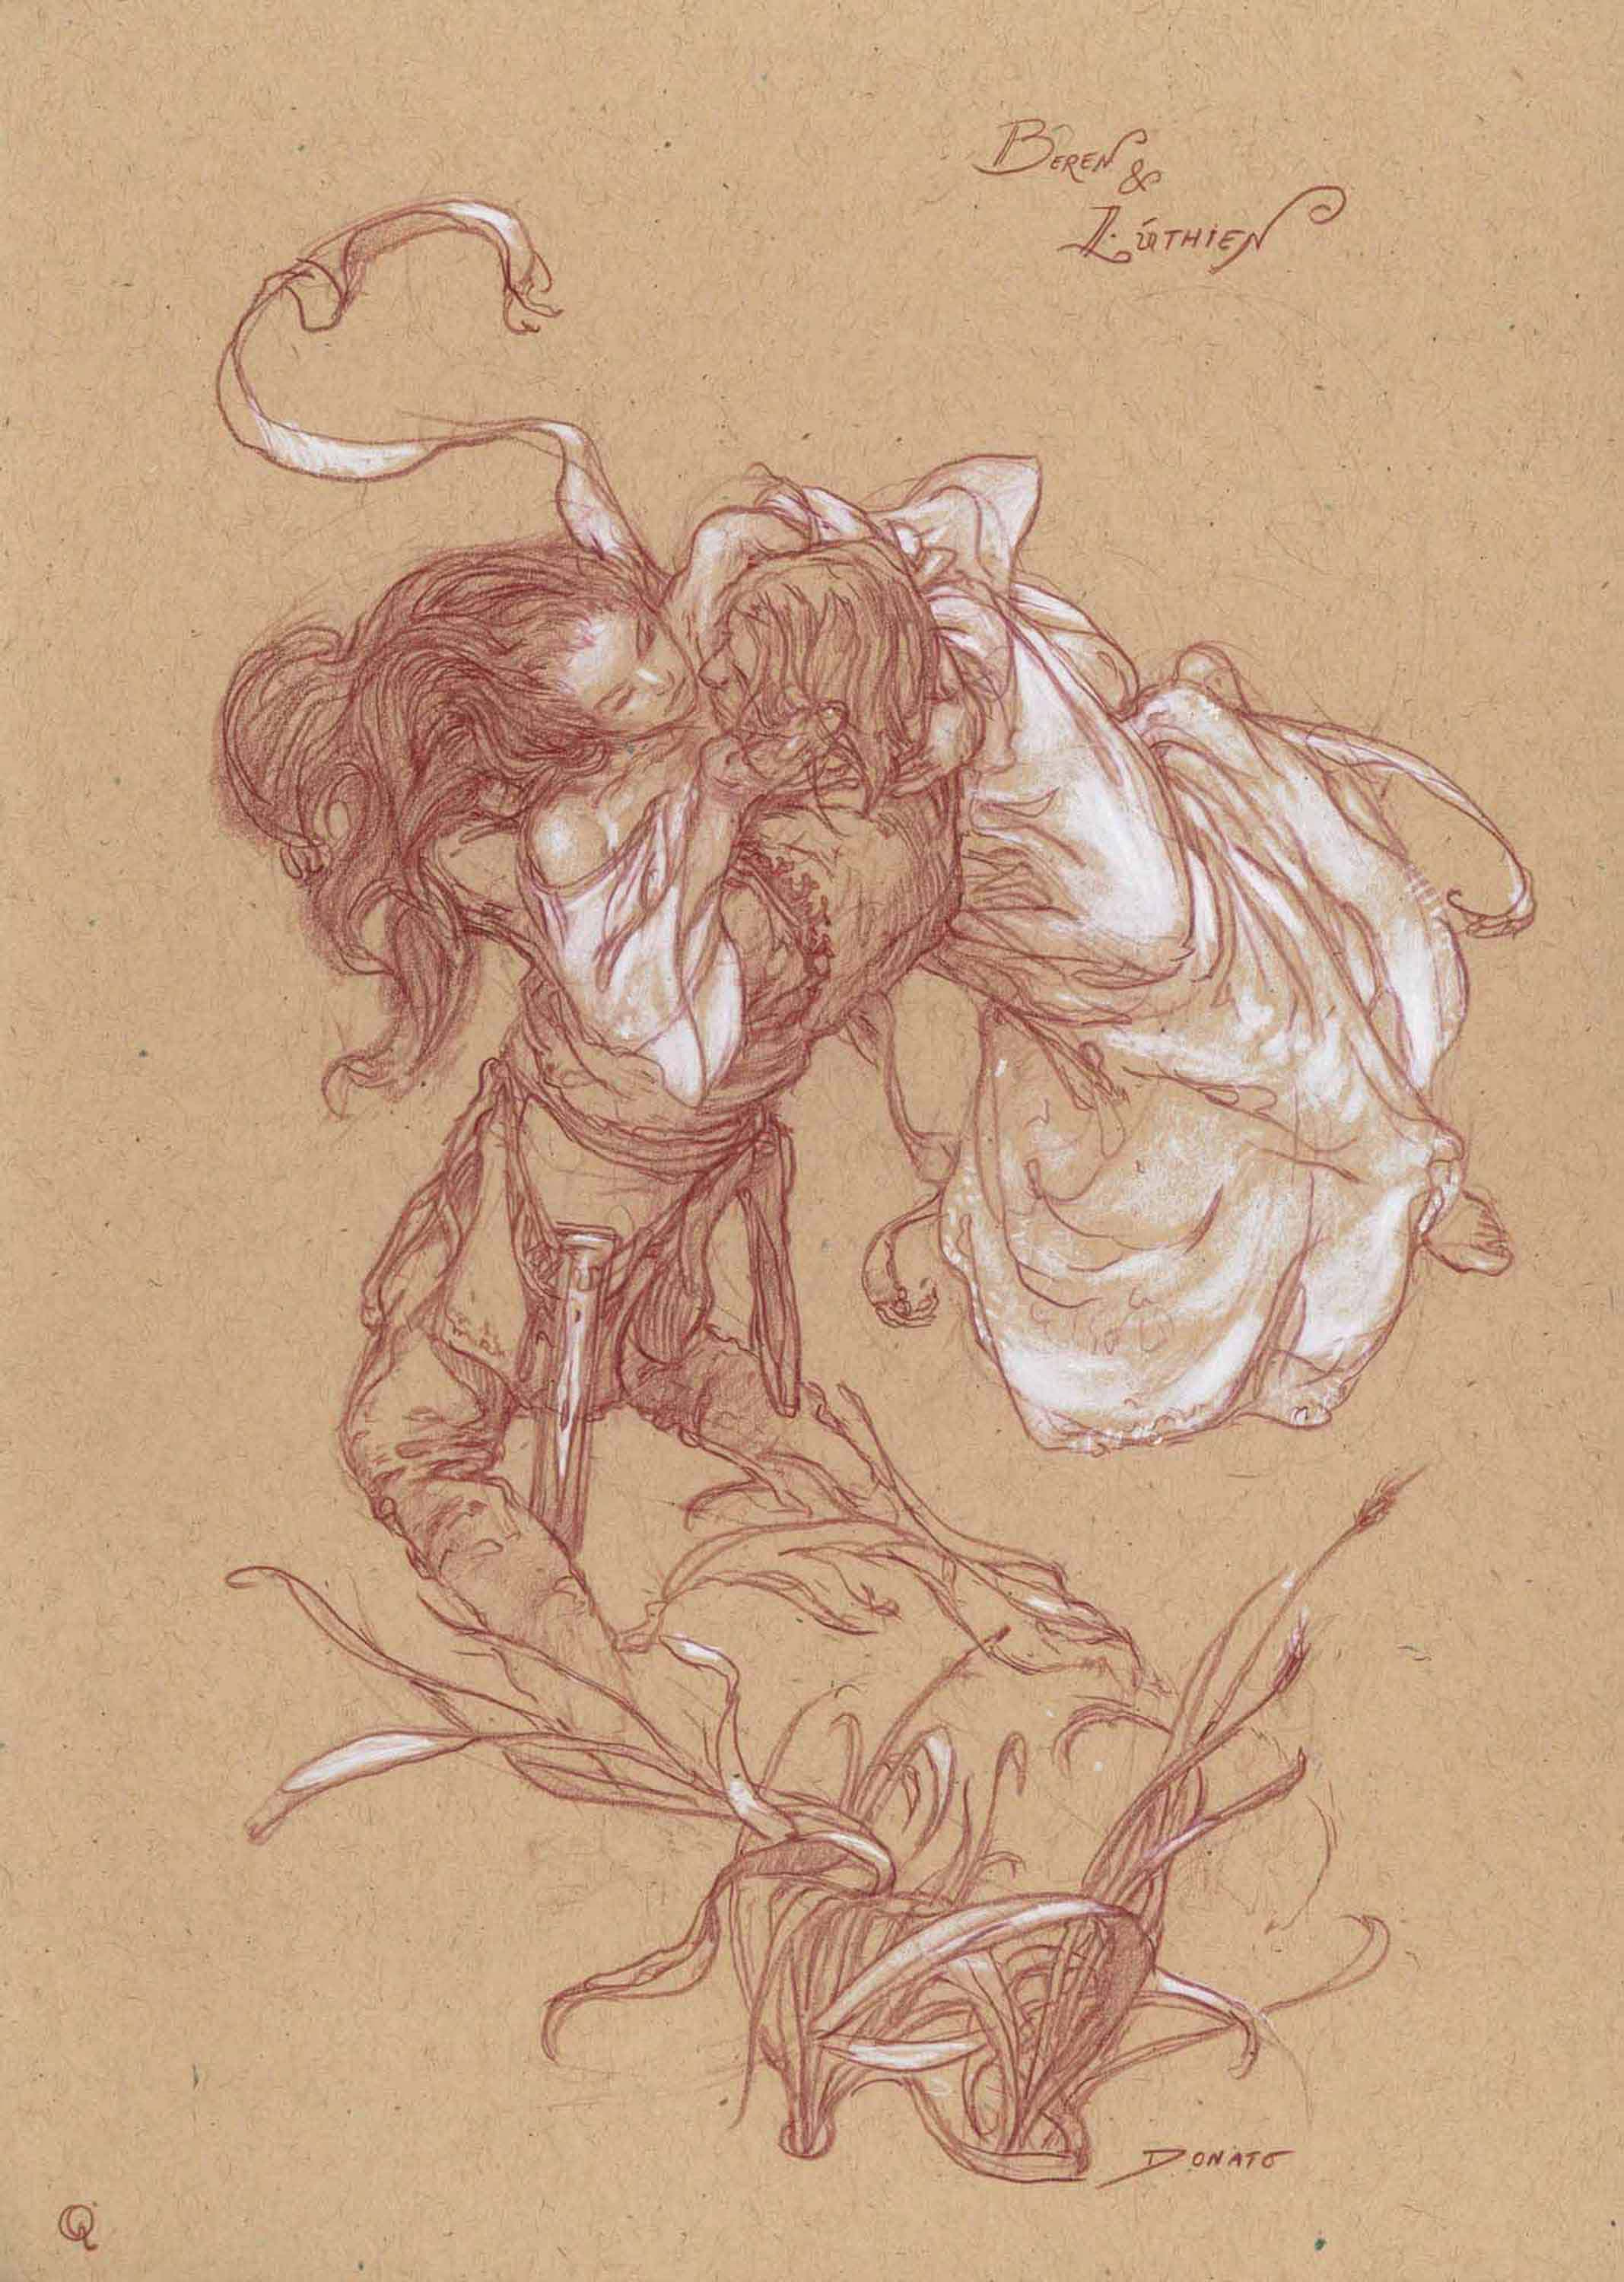 Beren and Luthien
11" x 8"  Watercolor Pencil and Chalk on Toned paper 2012
private collection